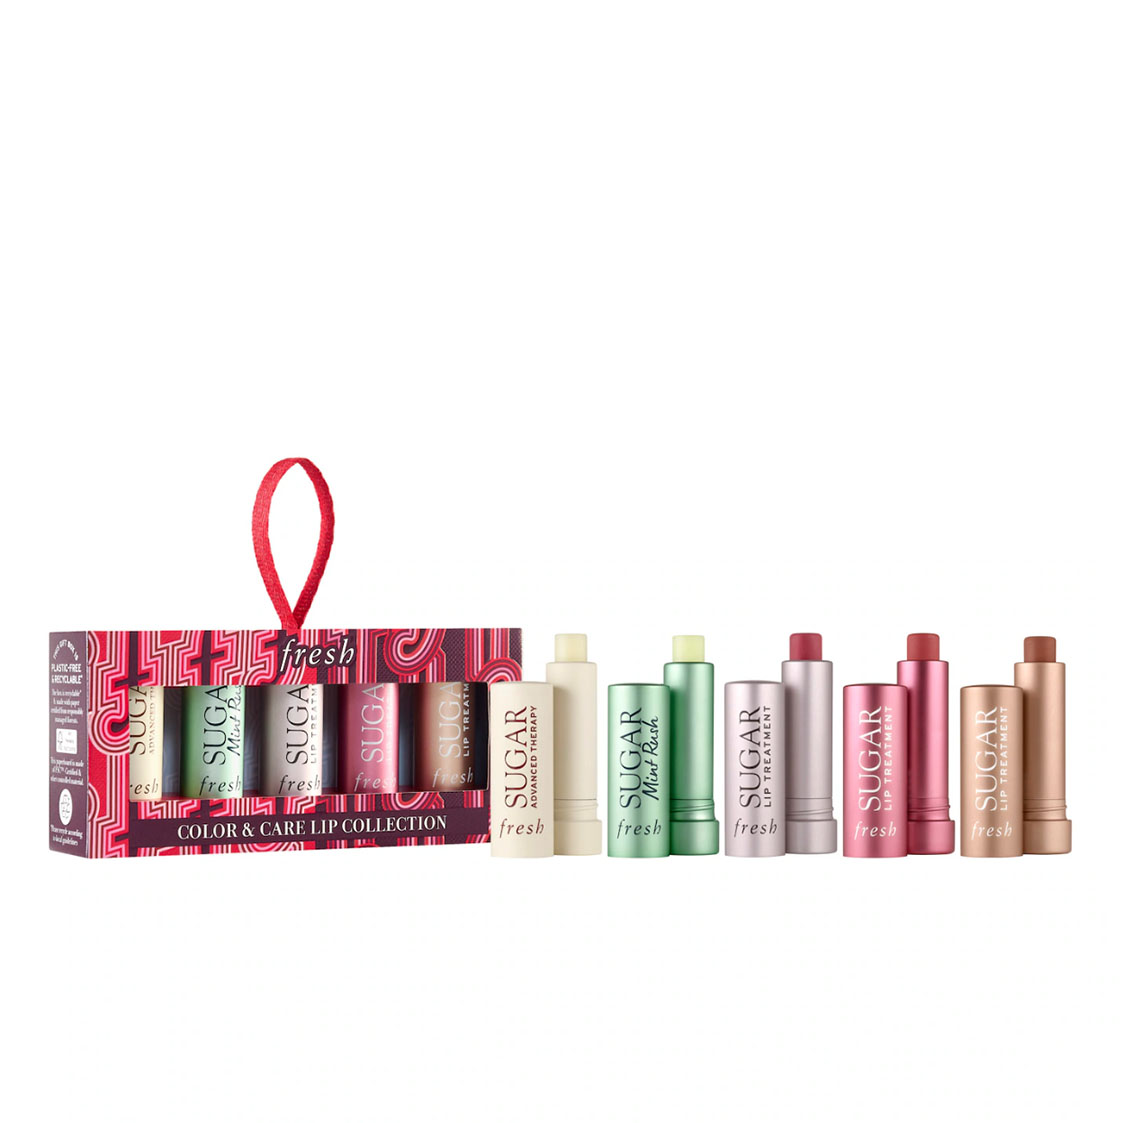 Set of lip balms in different colors